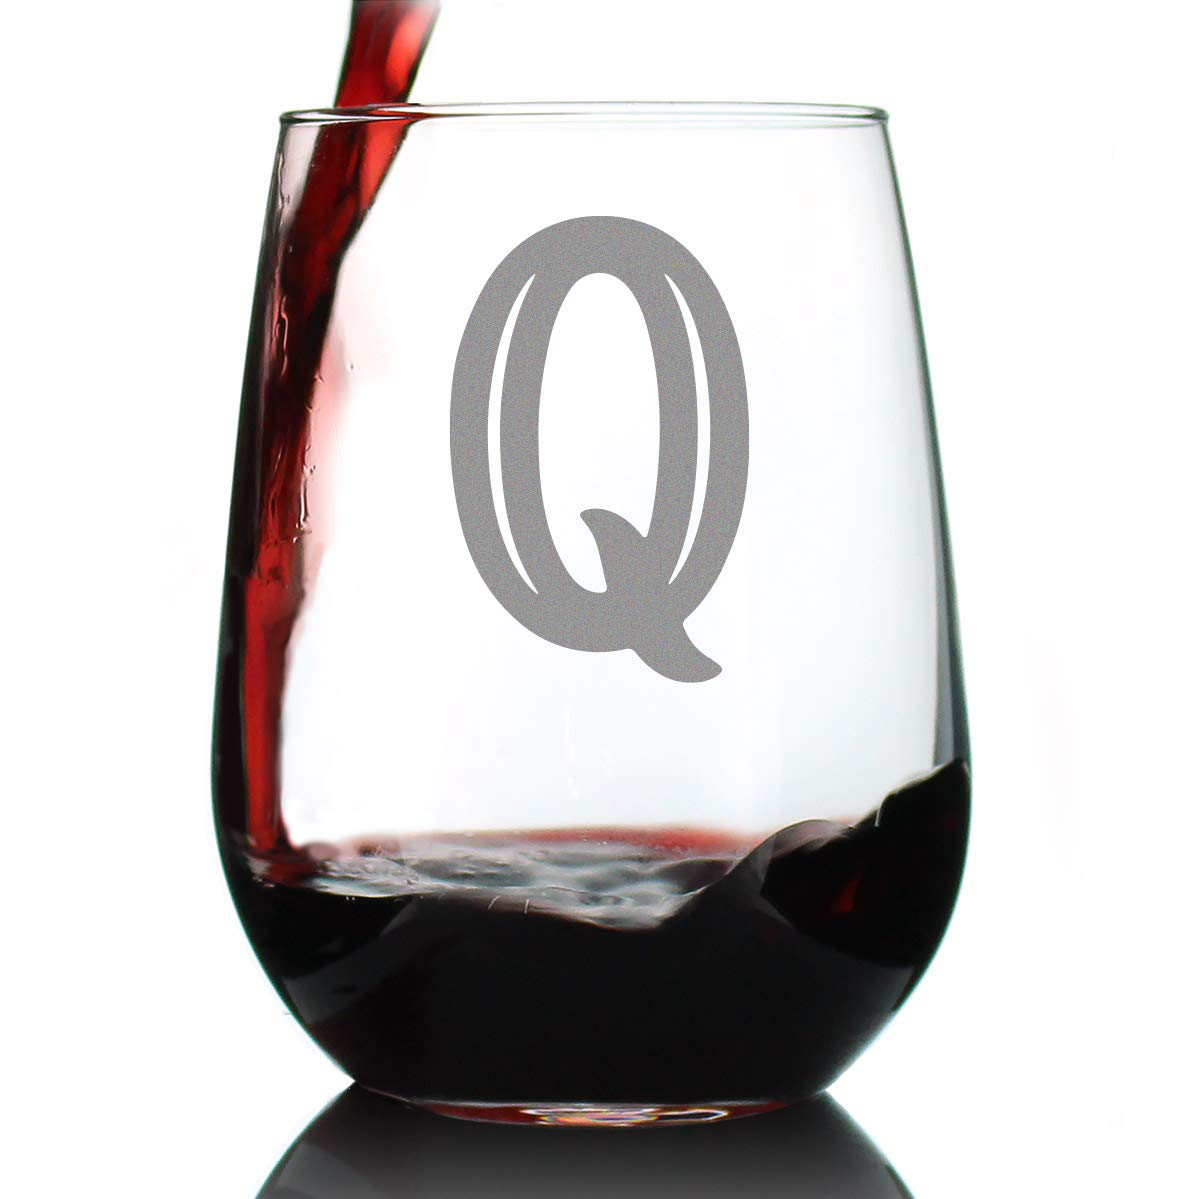 Monogram Bold Letter M - Stemless Wine Glass - Personalized Gifts for Women and Men - Large Engraved Glasses